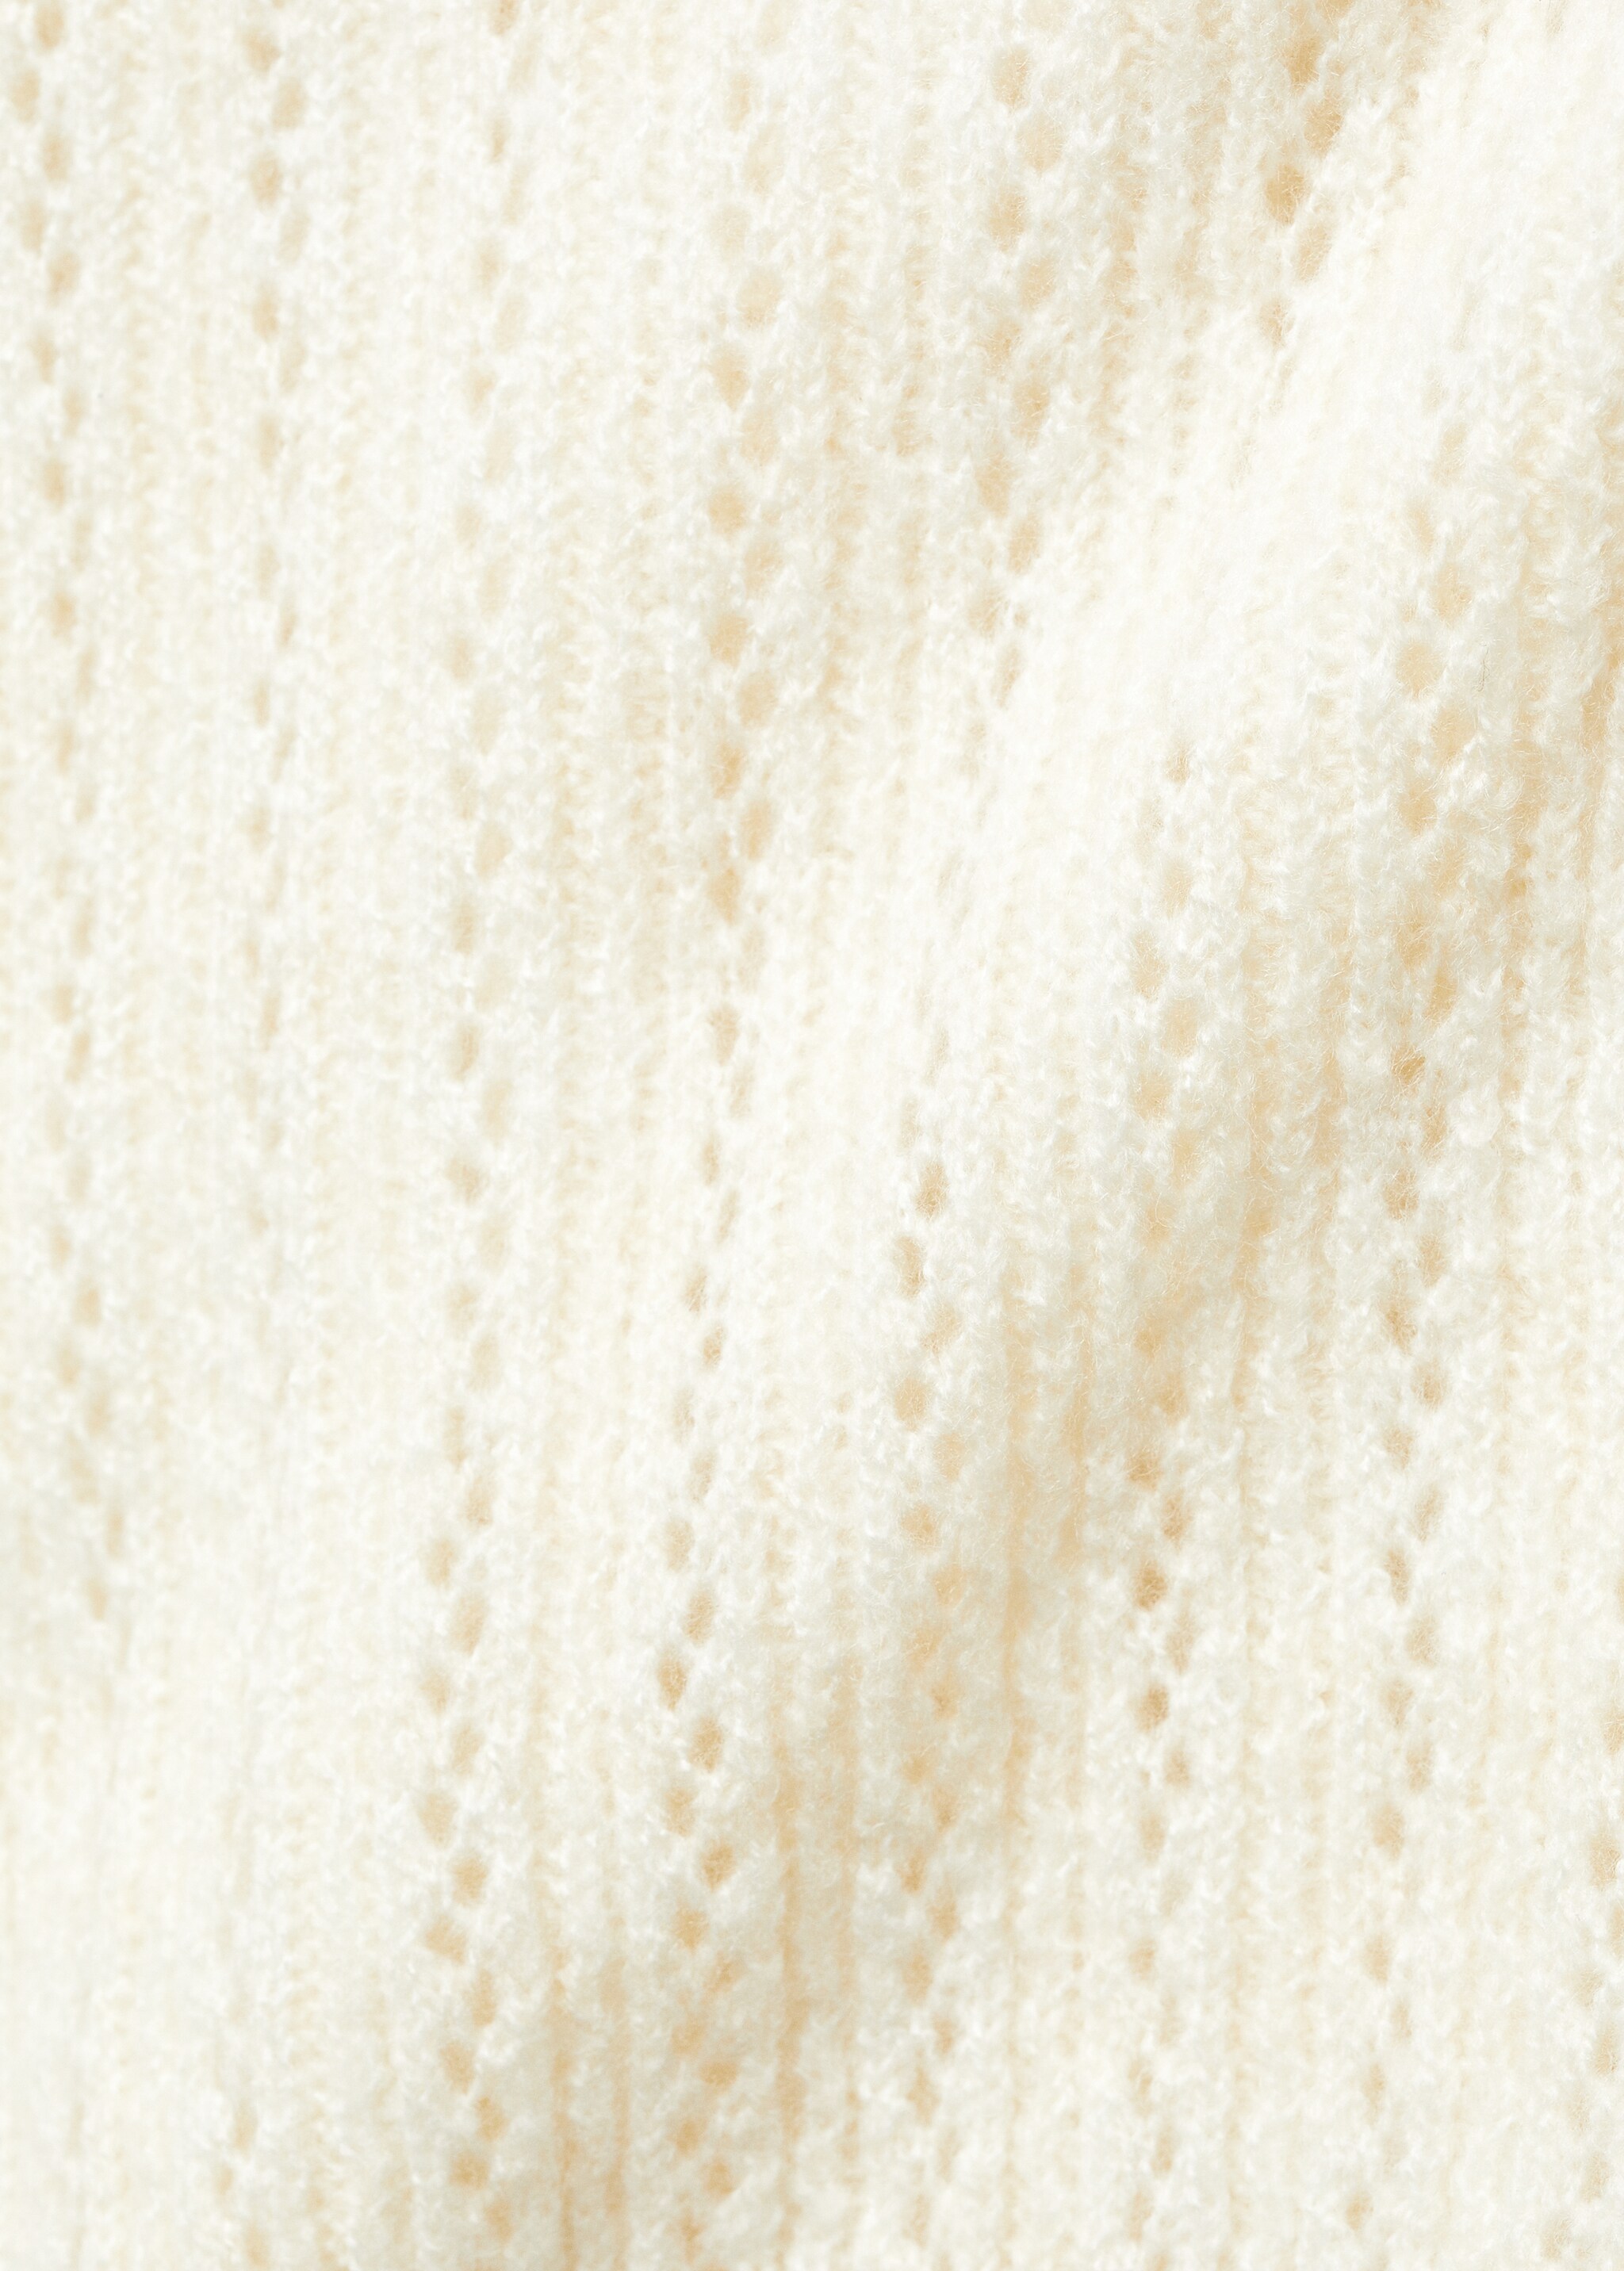 Openwork panel sweater - Details of the article 8